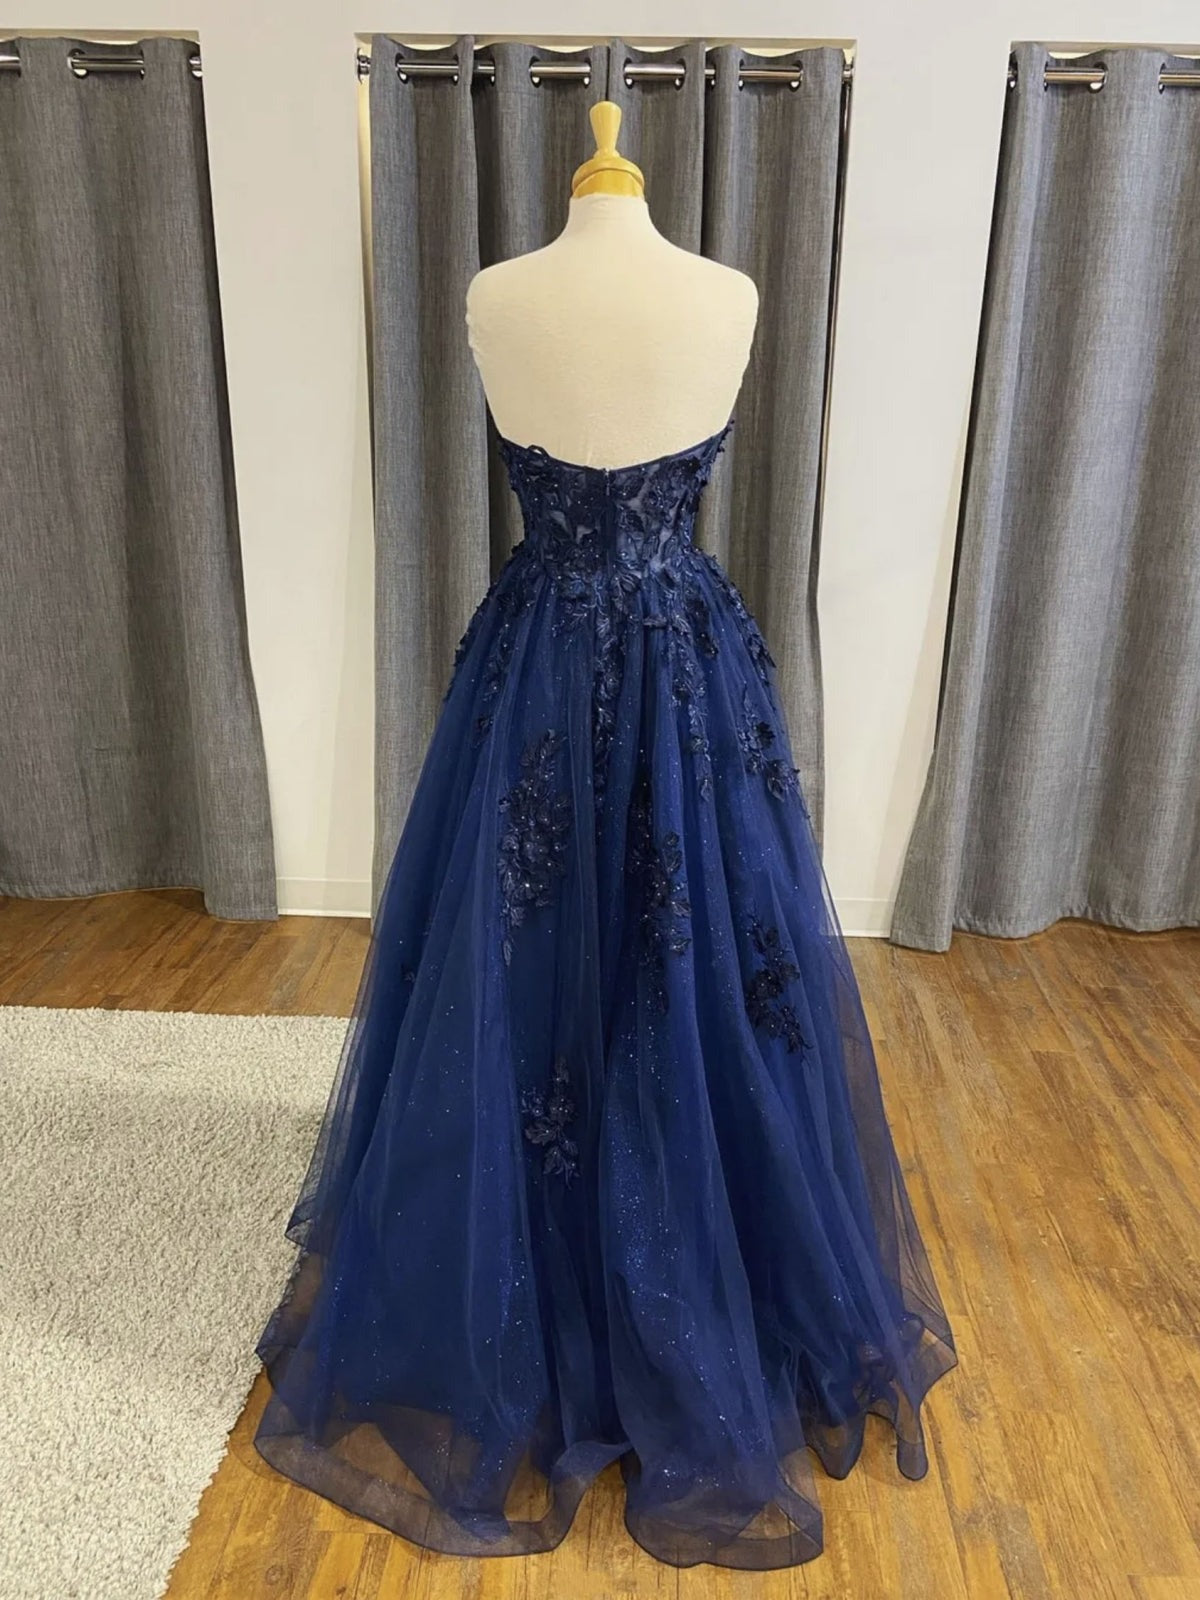 Bridesmaid Dress Formal, Dark Navy Long A-line Tulle Lace Backless Formal Prom Dresses